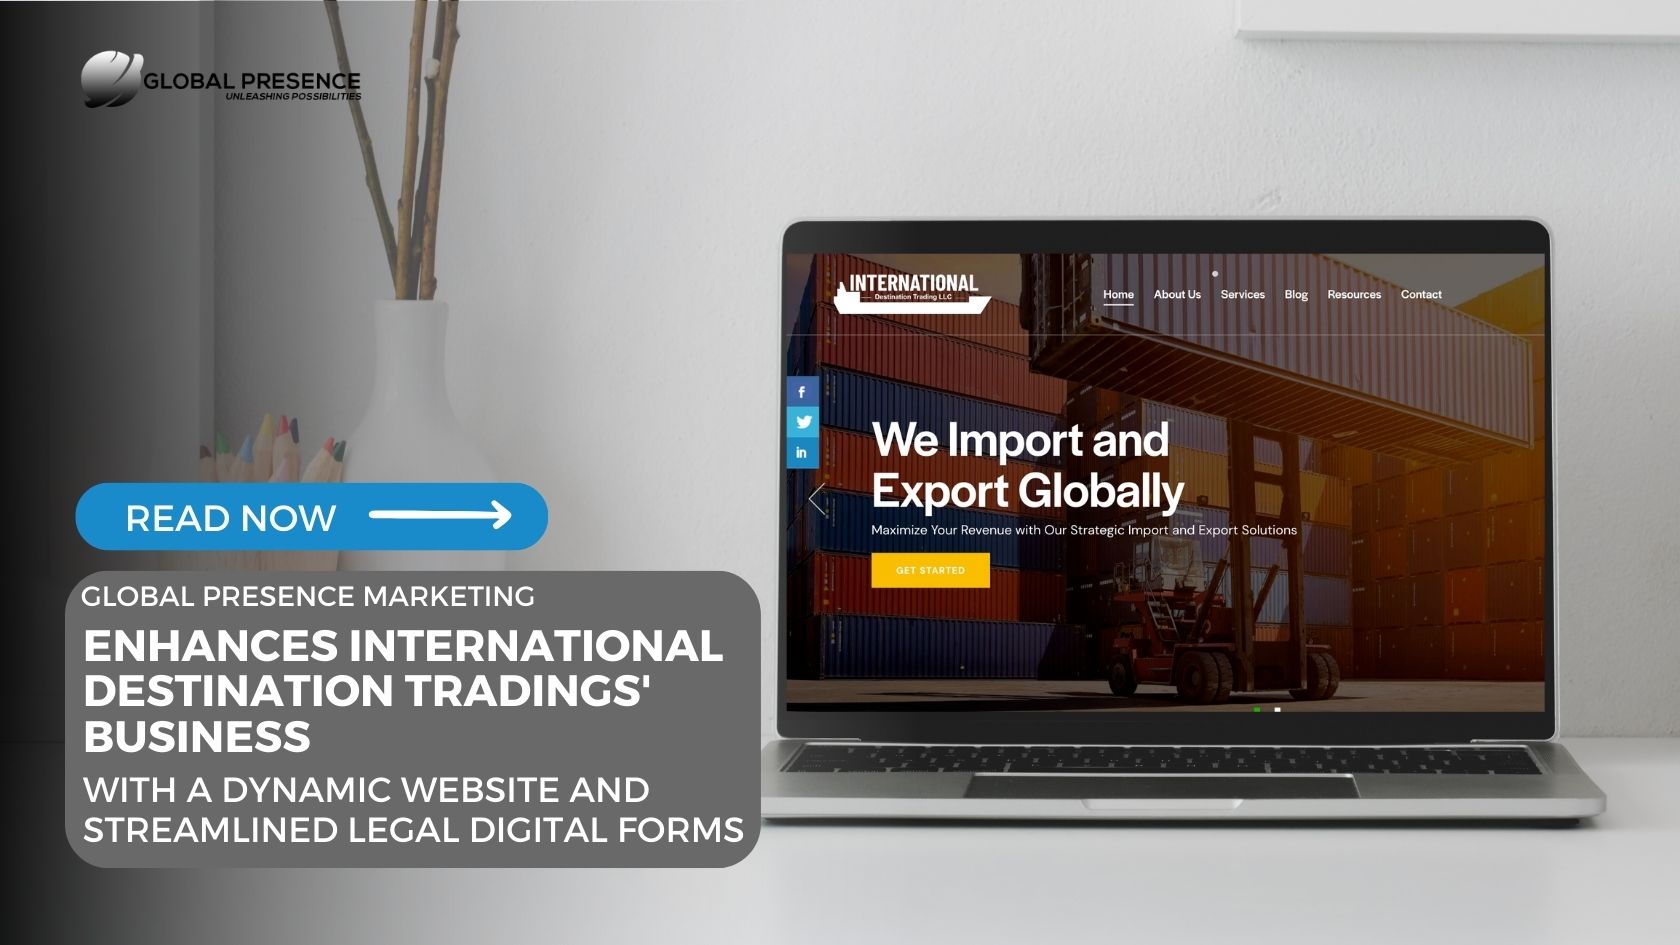 Global Presence Marketing Enhances ID Tradings' Business with a Dynamic Website and Streamlined Legal Digital Forms